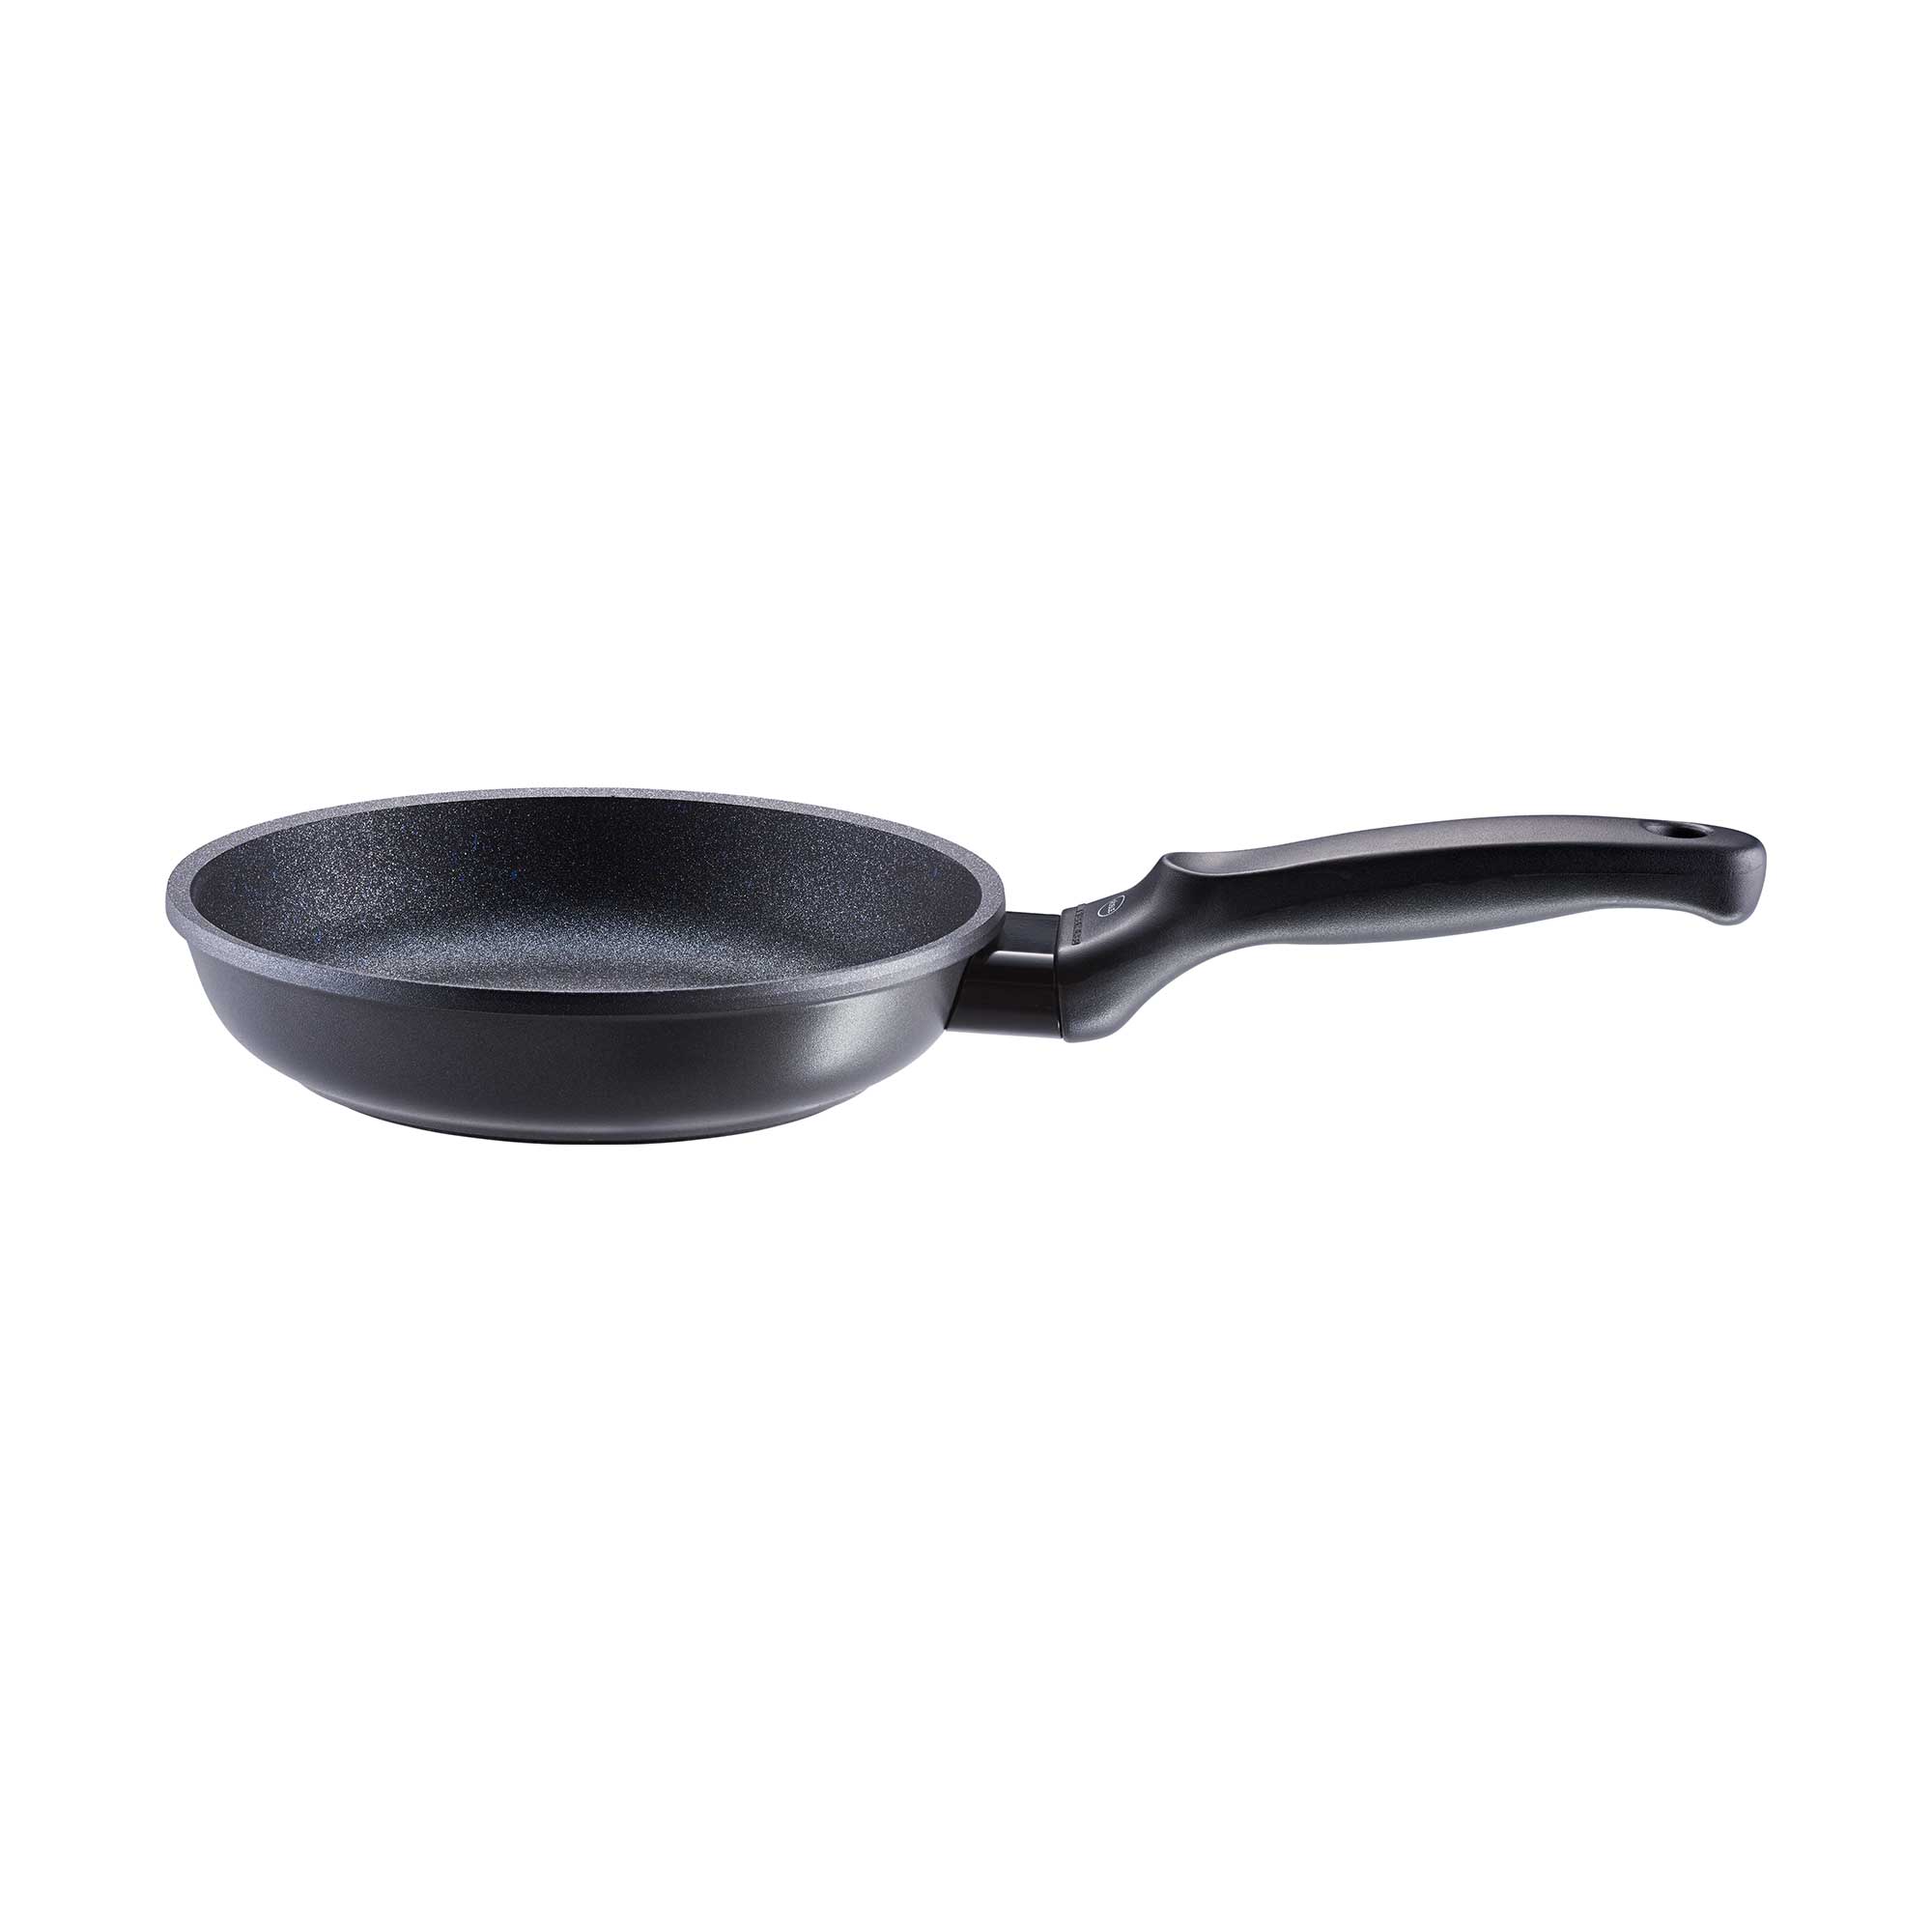 Frying Pan "Cadini" Ø 20 cm | 8.0 in. from cast aluminum with non-stick coating ProResist